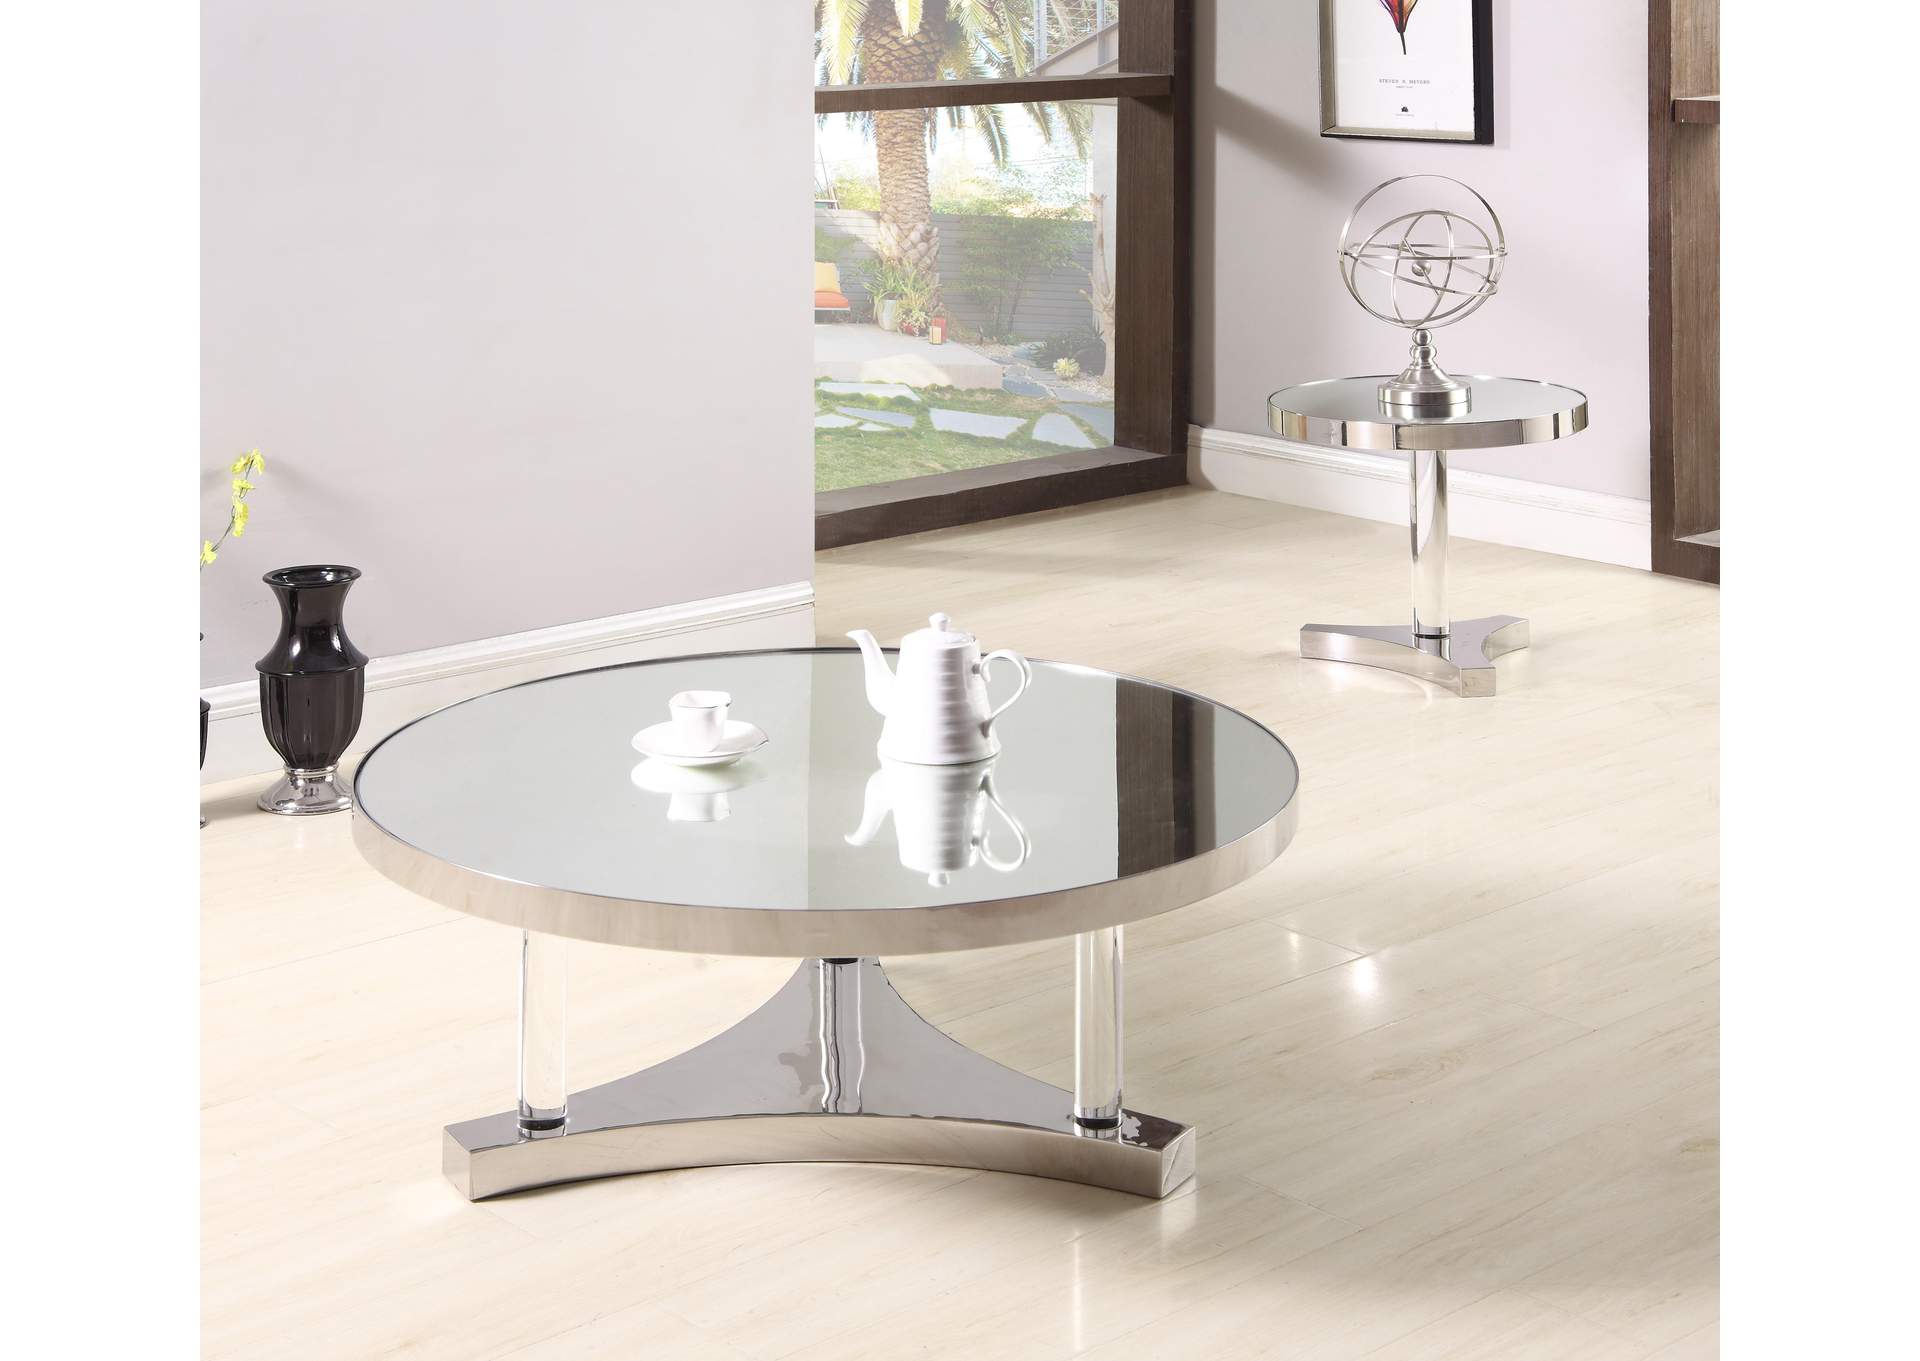 Polished SS Cocktail Table w/ Mirror Accent,Chintaly Imports